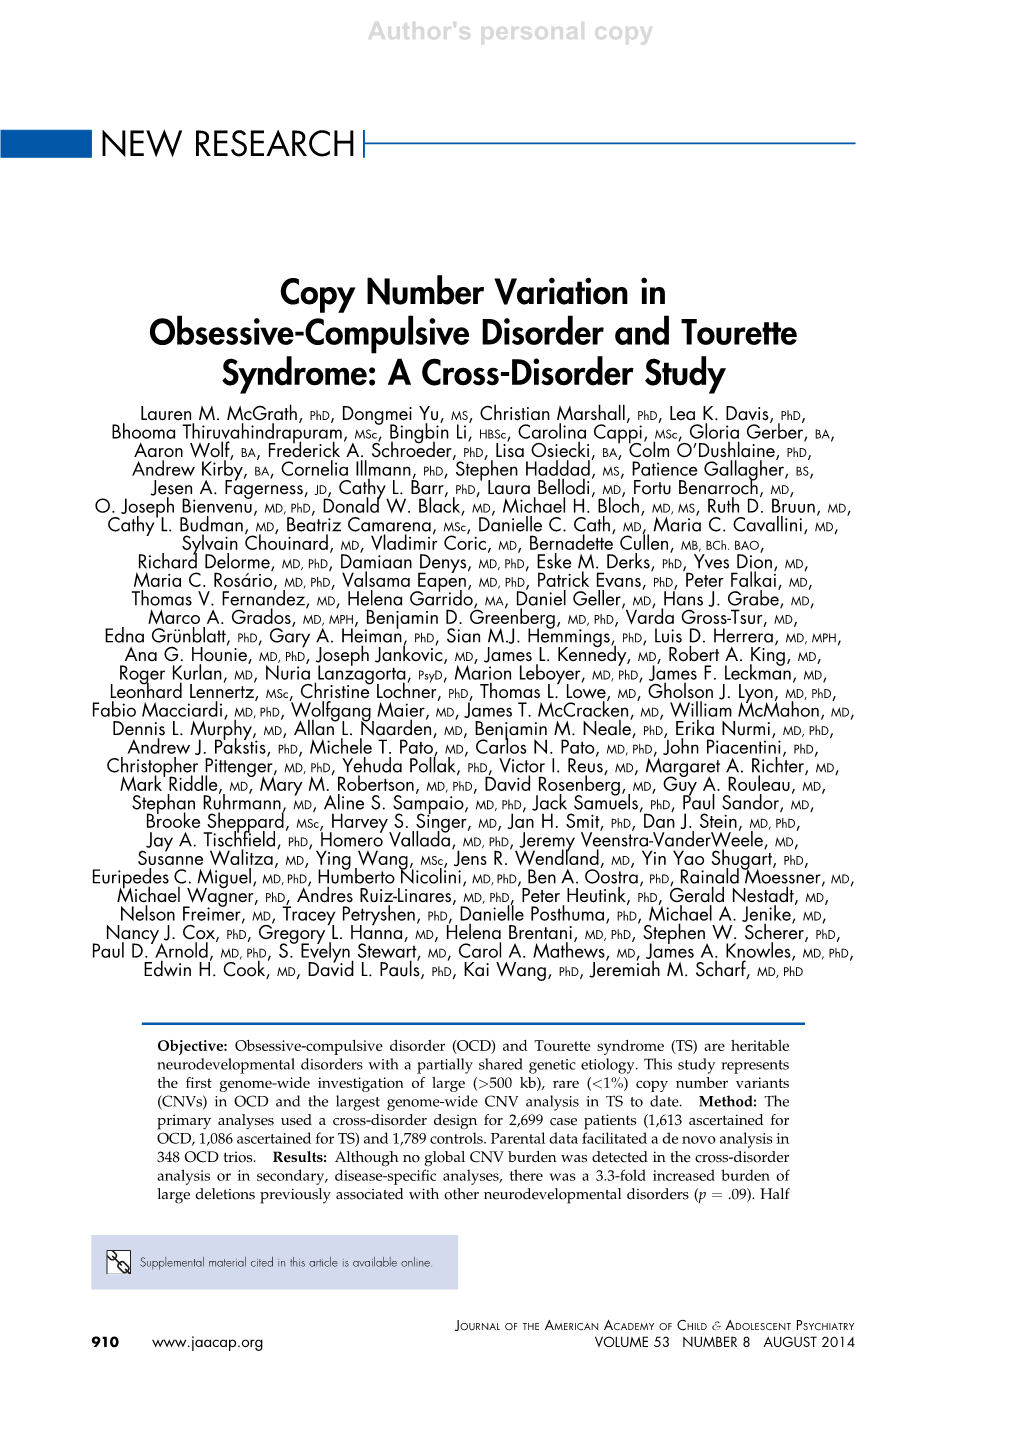 NEW RESEARCH Copy Number Variation in Obsessive-Compulsive